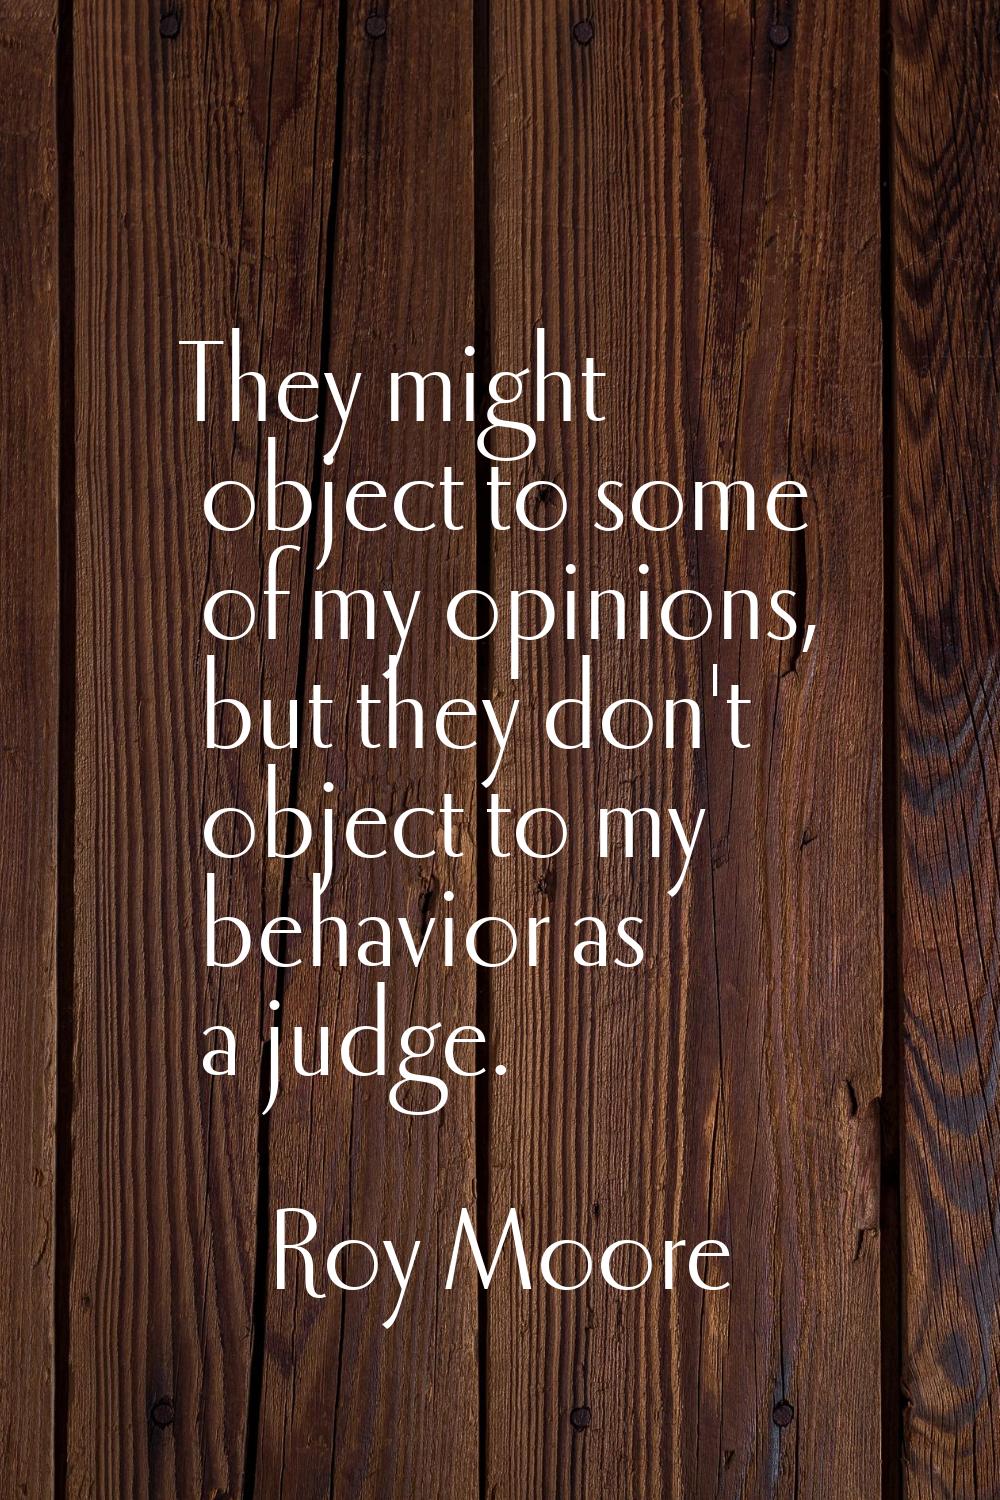 They might object to some of my opinions, but they don't object to my behavior as a judge.